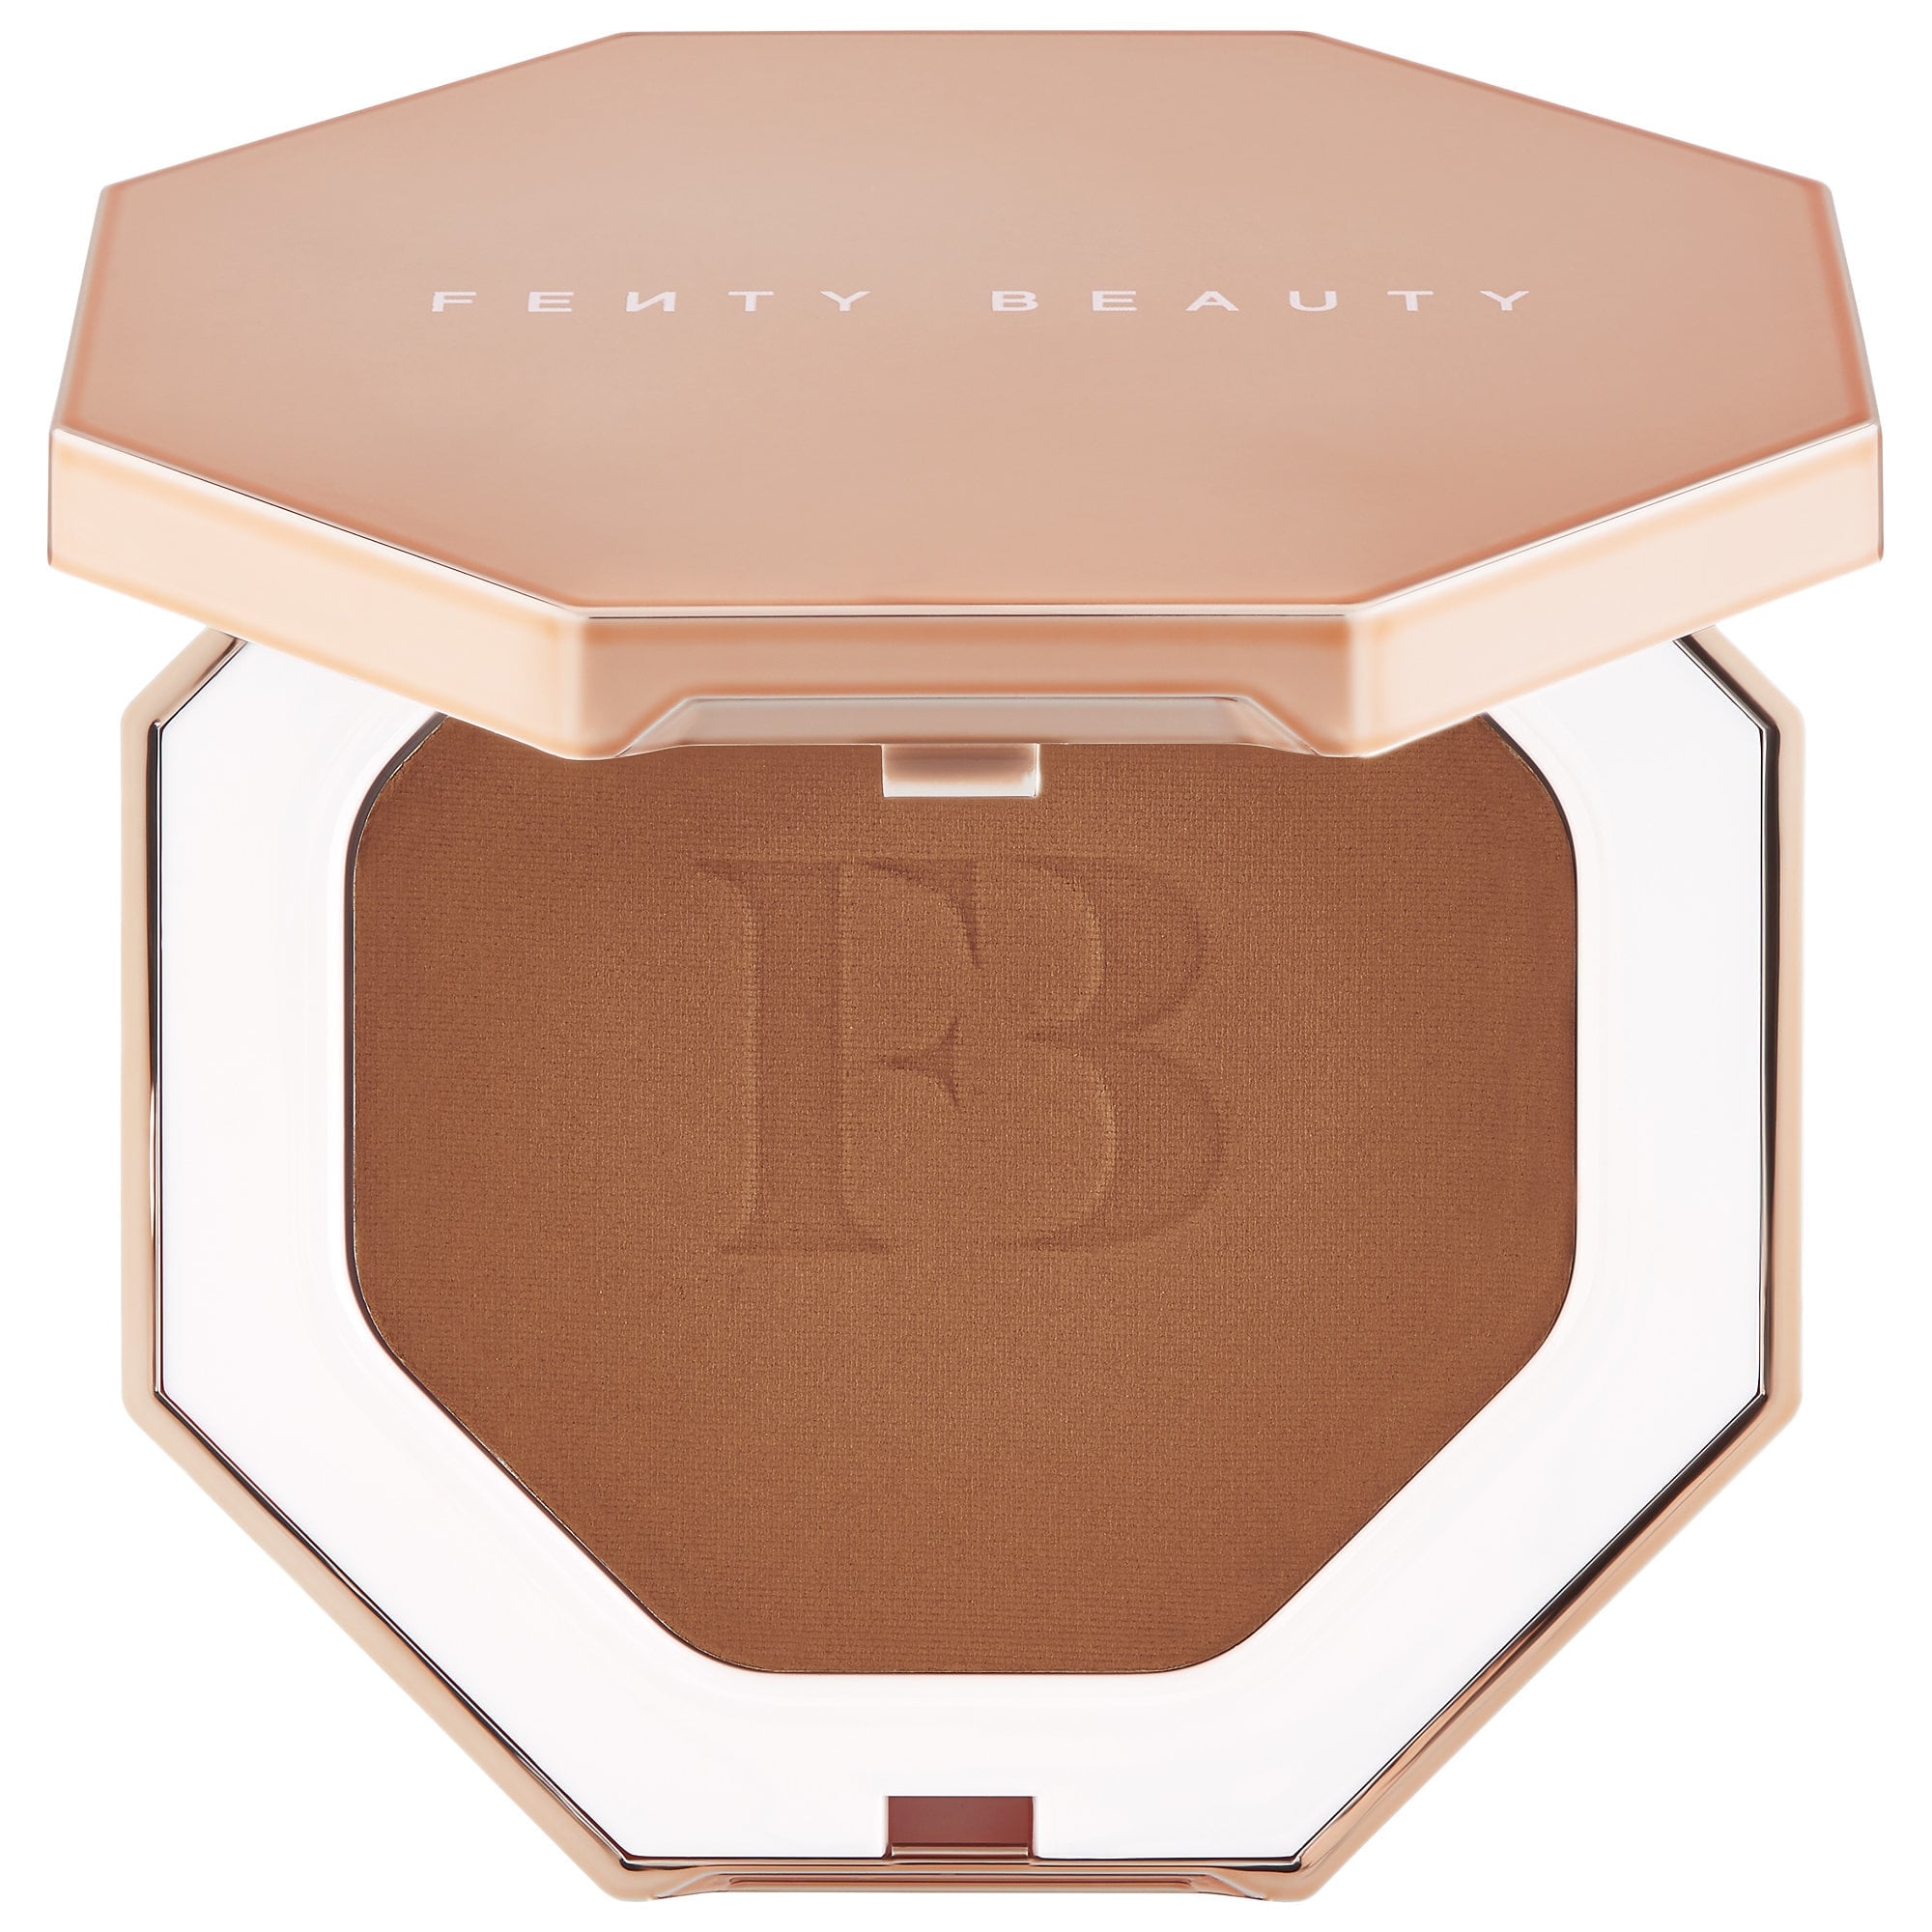 Fenty Beauty Sun Stalk R Instant Warmth Bronzer The Products And People Behind Cardi B S Outrageous Beauty Looks In Clout Popsugar Beauty Photo 11